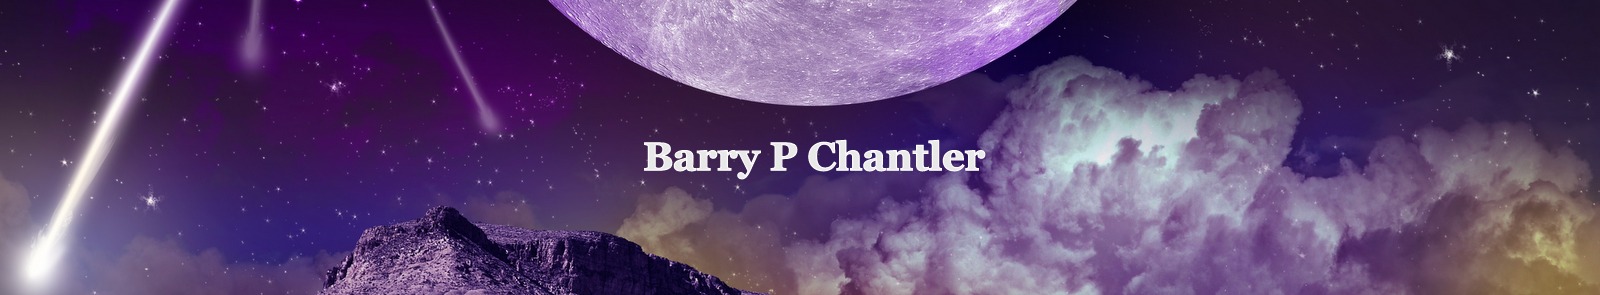 Short Stories by Barry P Chantler